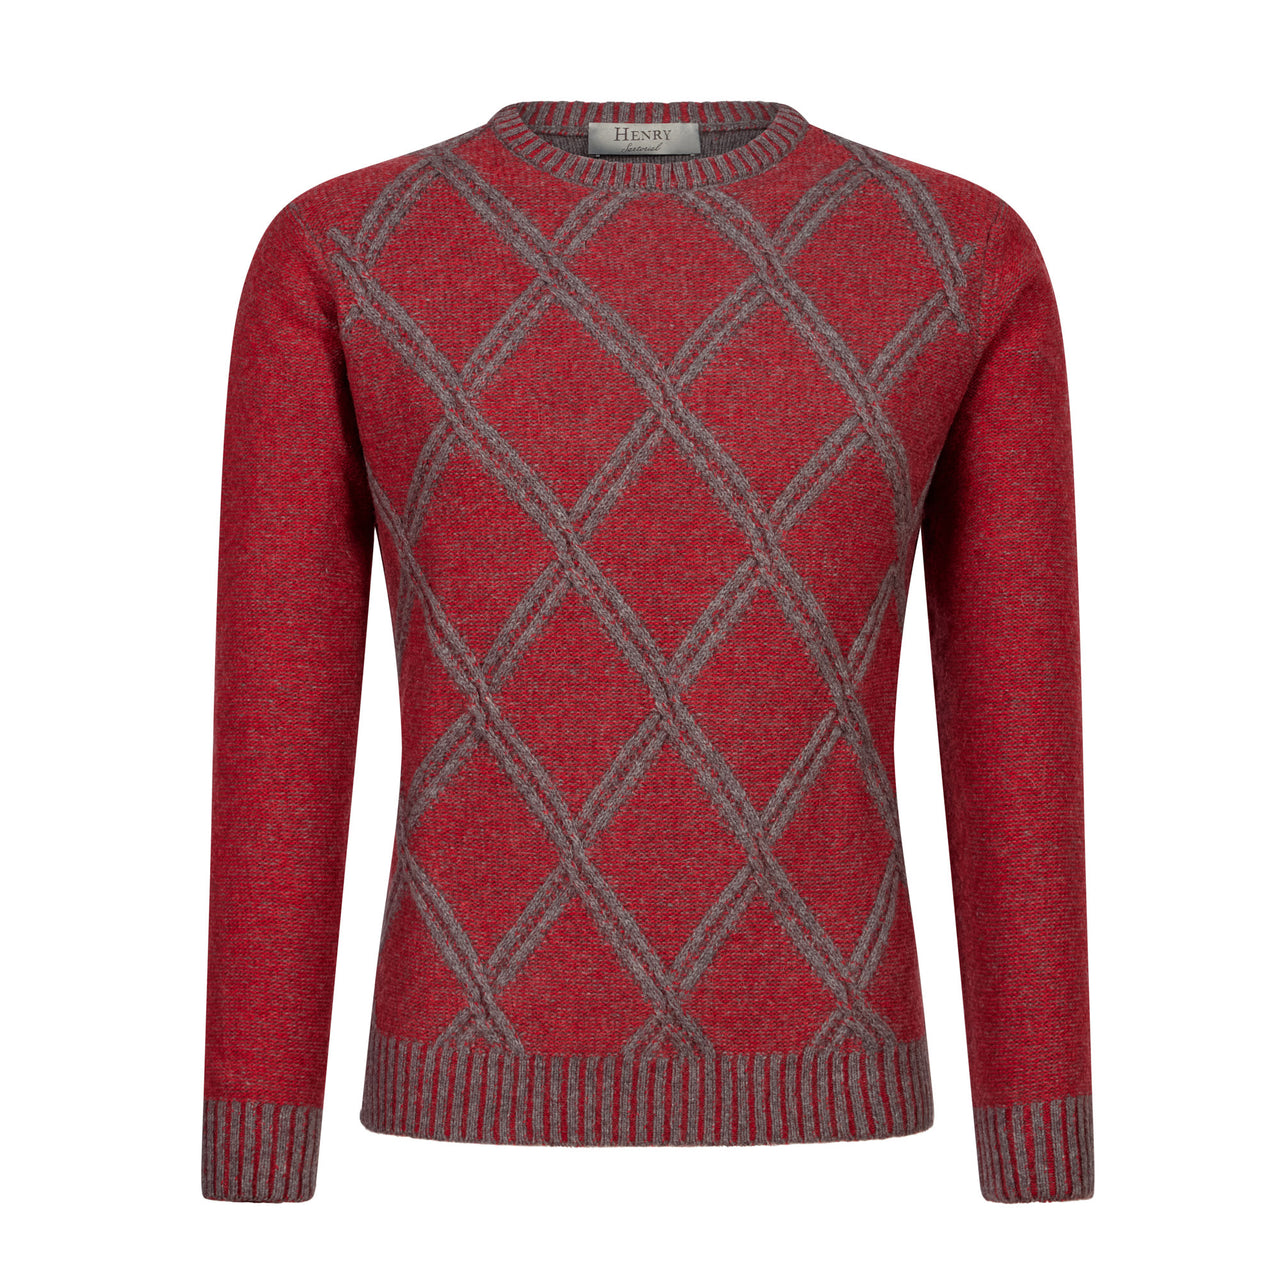 HENRY SARTORIAL Plaid Crew Neck 70% Wool RED